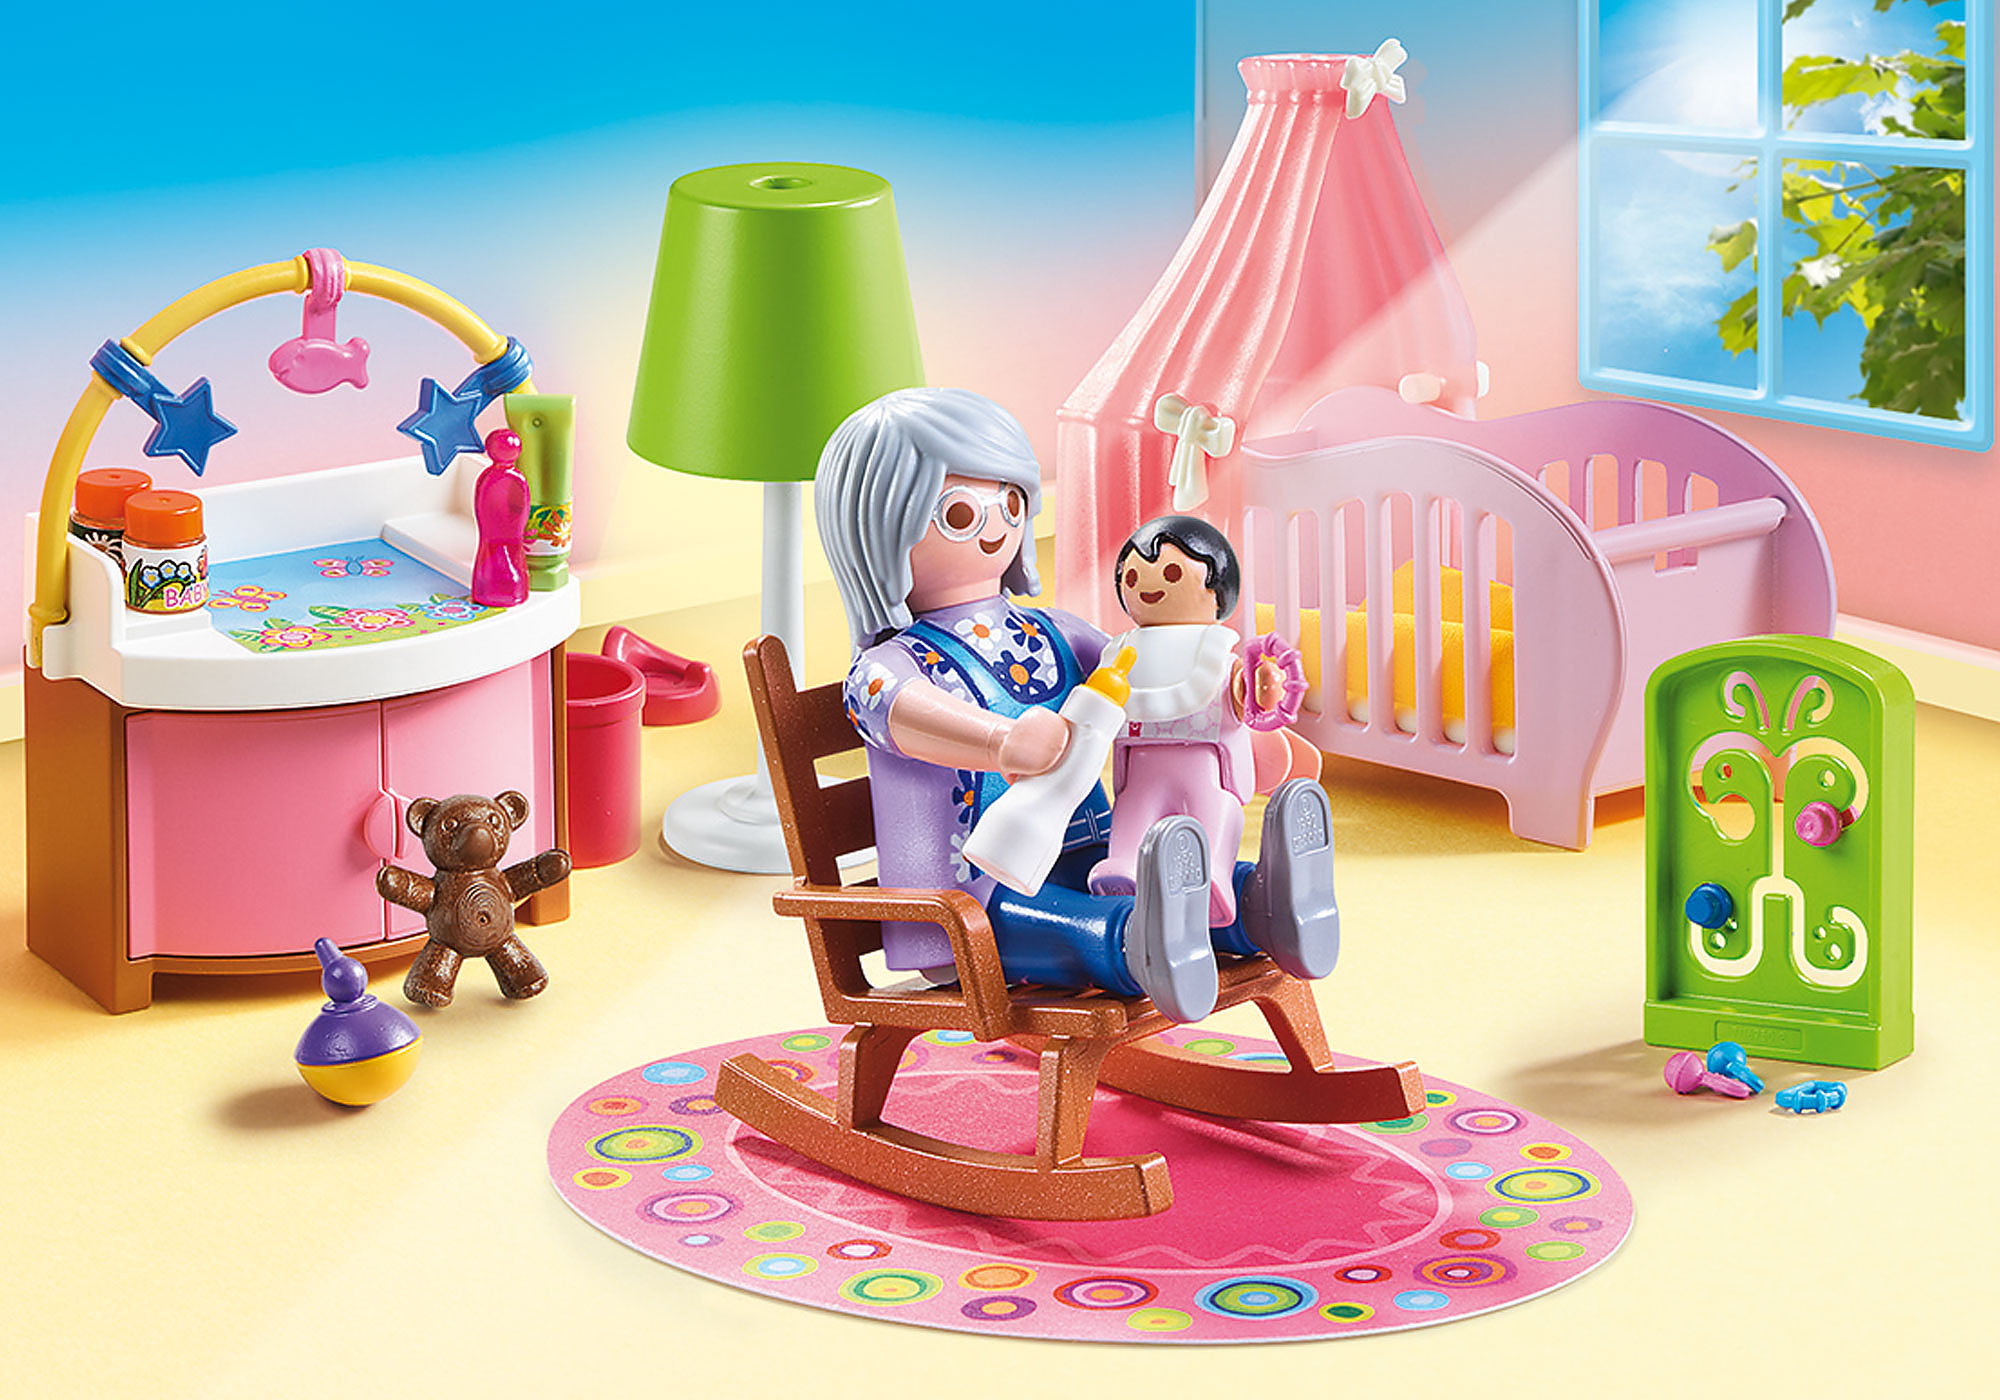 chambre fille playmobil